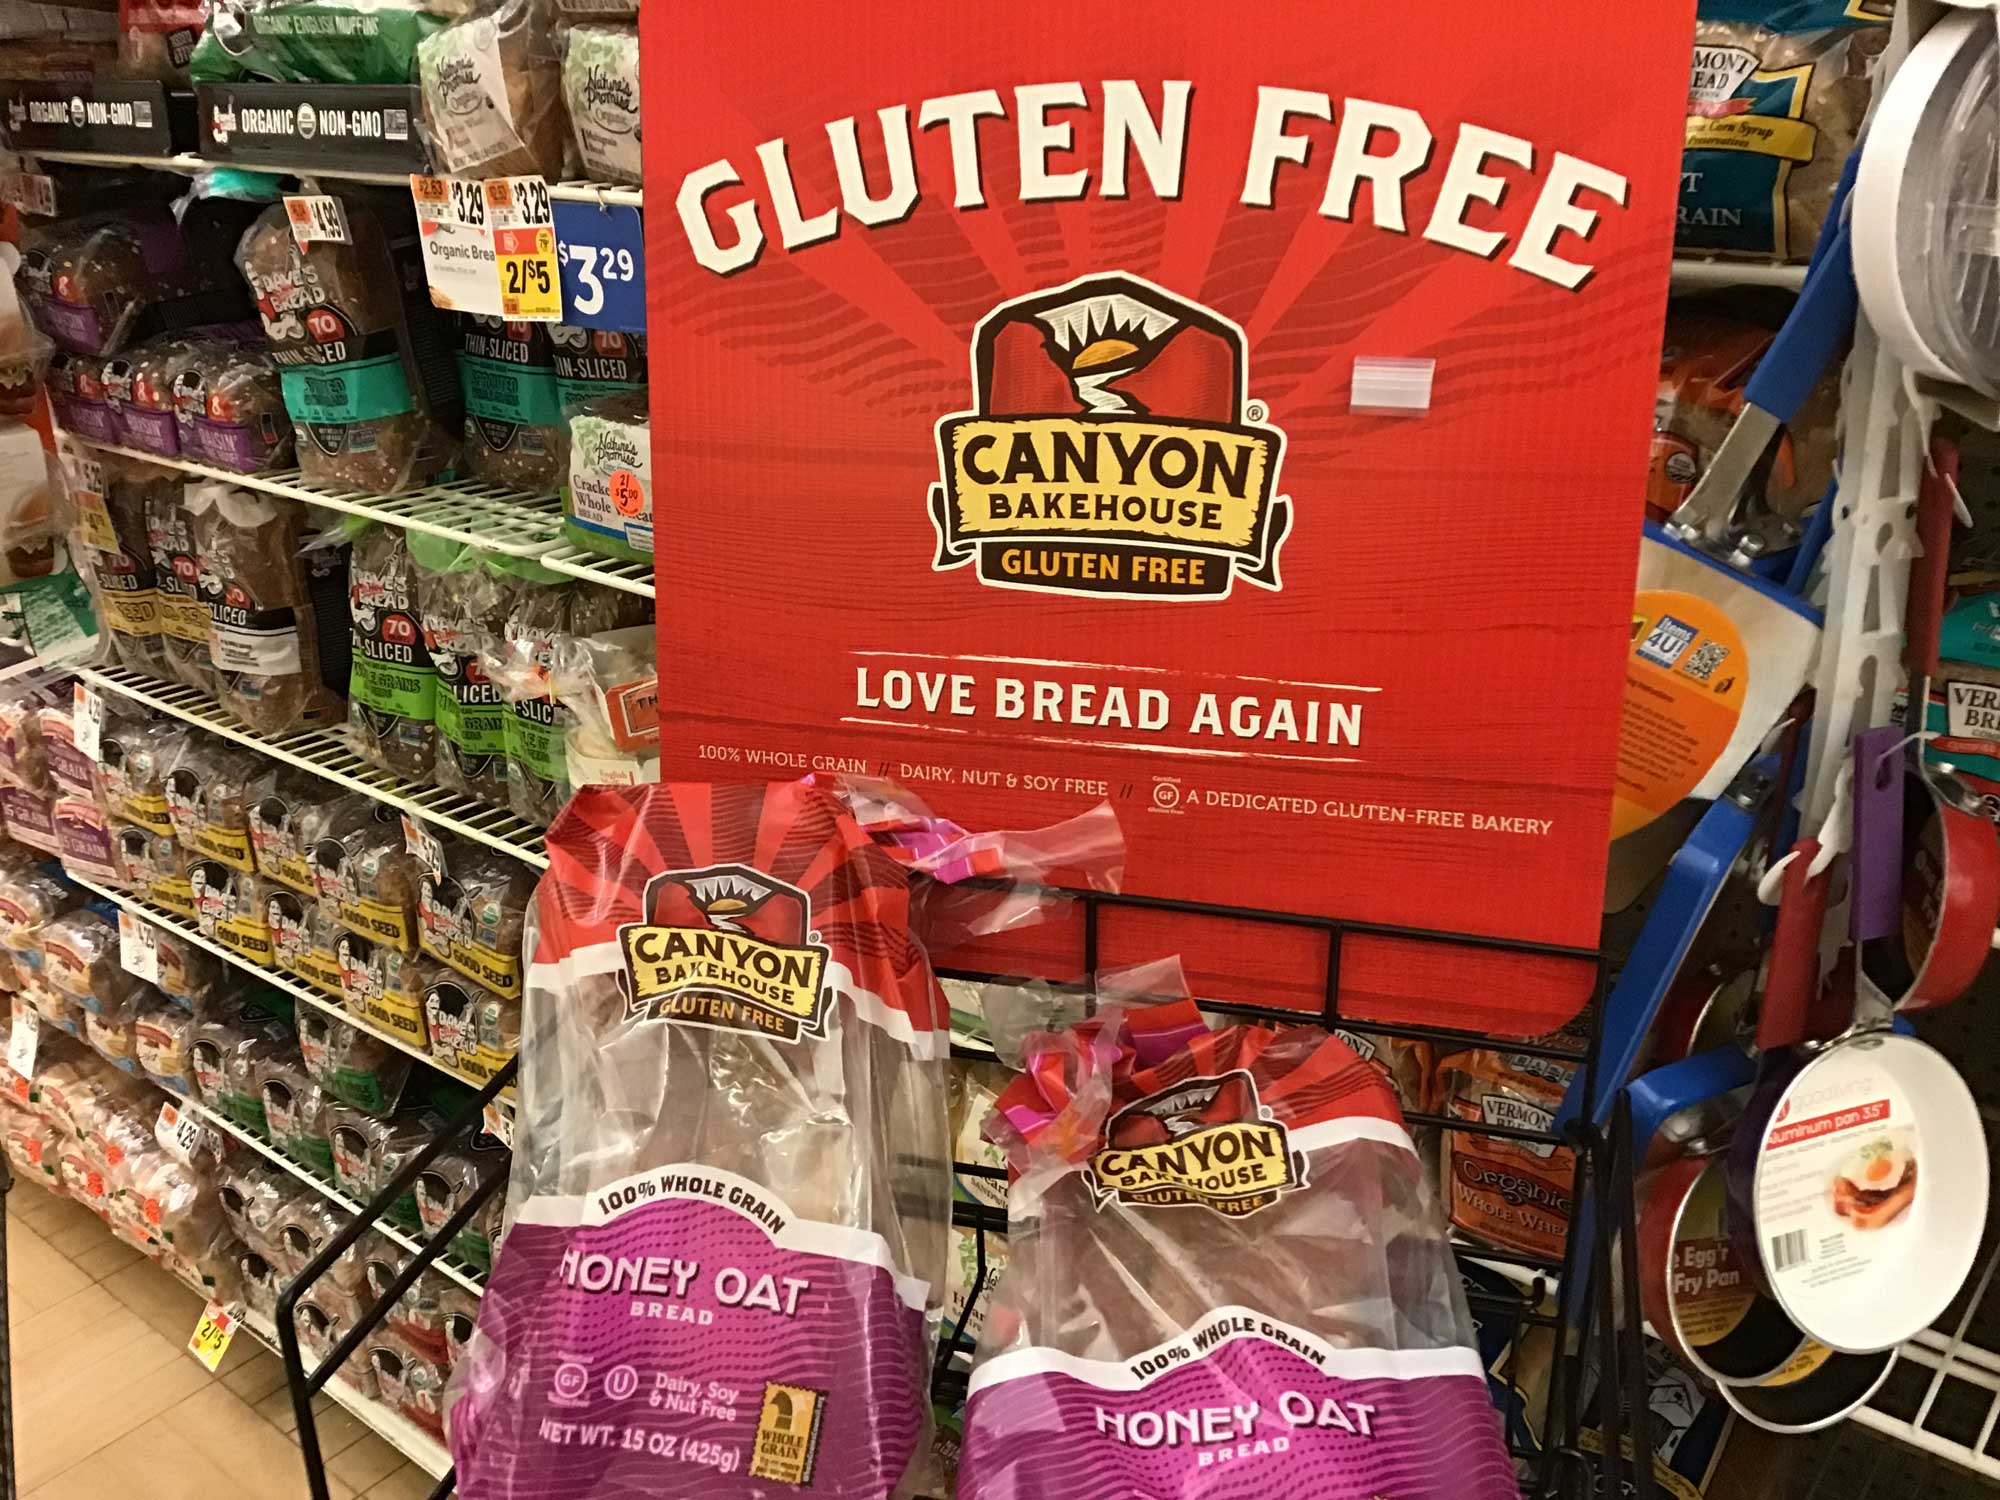 Photograph of a display of gluten free bread at a grocery store. A red sign at the top of the display says "Gluten Free" in large white letters. Two loaves of prepackaged and sliced bread also have labels reading "gluten free."